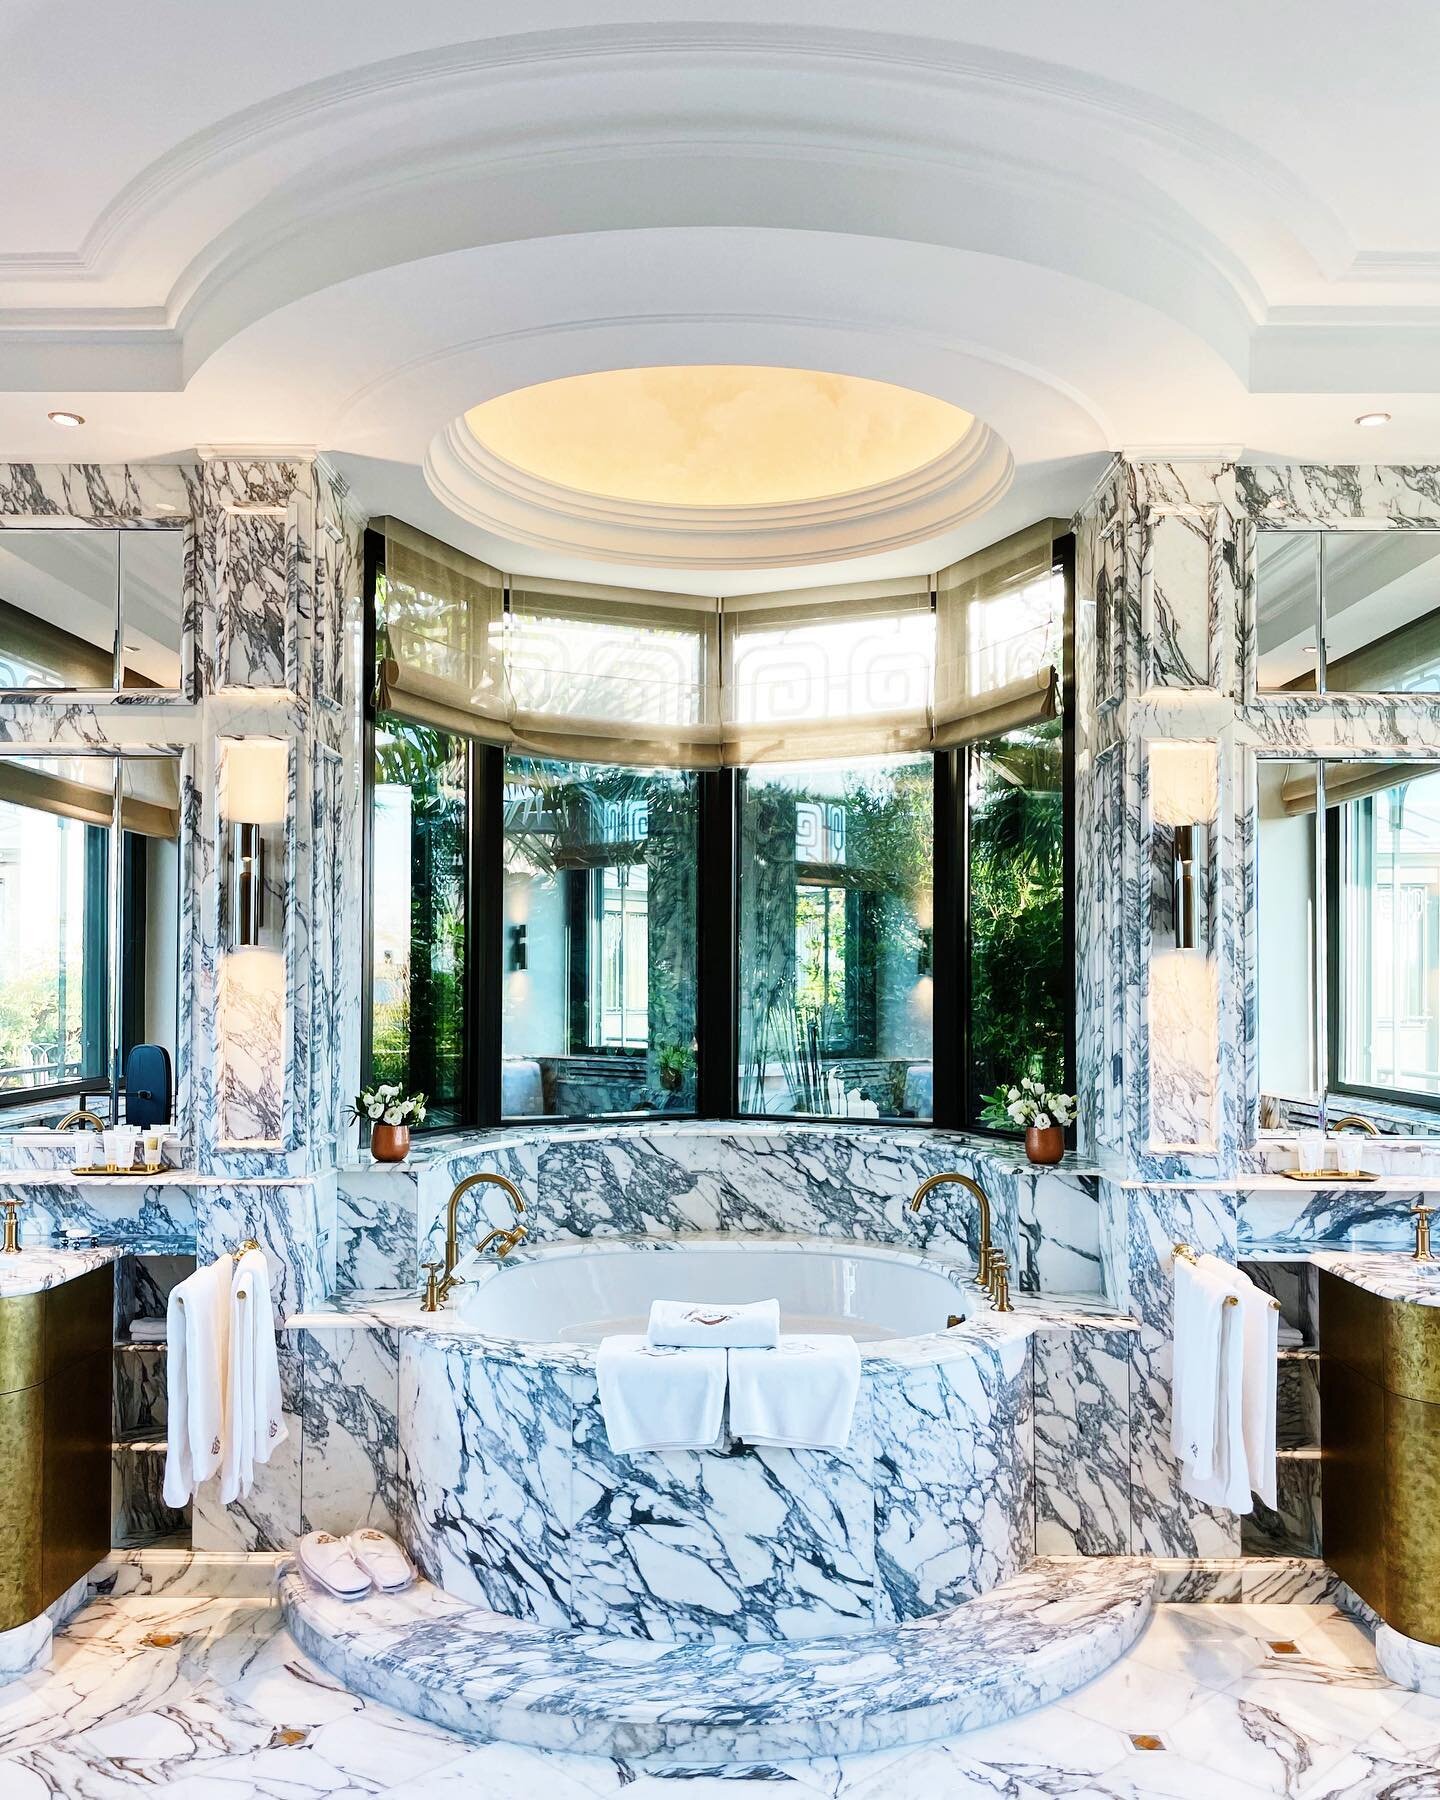 elle s&rsquo;appelle la belle &eacute;toile ✨ no really, that&rsquo;s the name of this stunner penthouse suite at le meurice offering this mystical bathroom + breathtaking views of the entire city nestled beside the tuileries
🇫🇷
as my final soir&ea